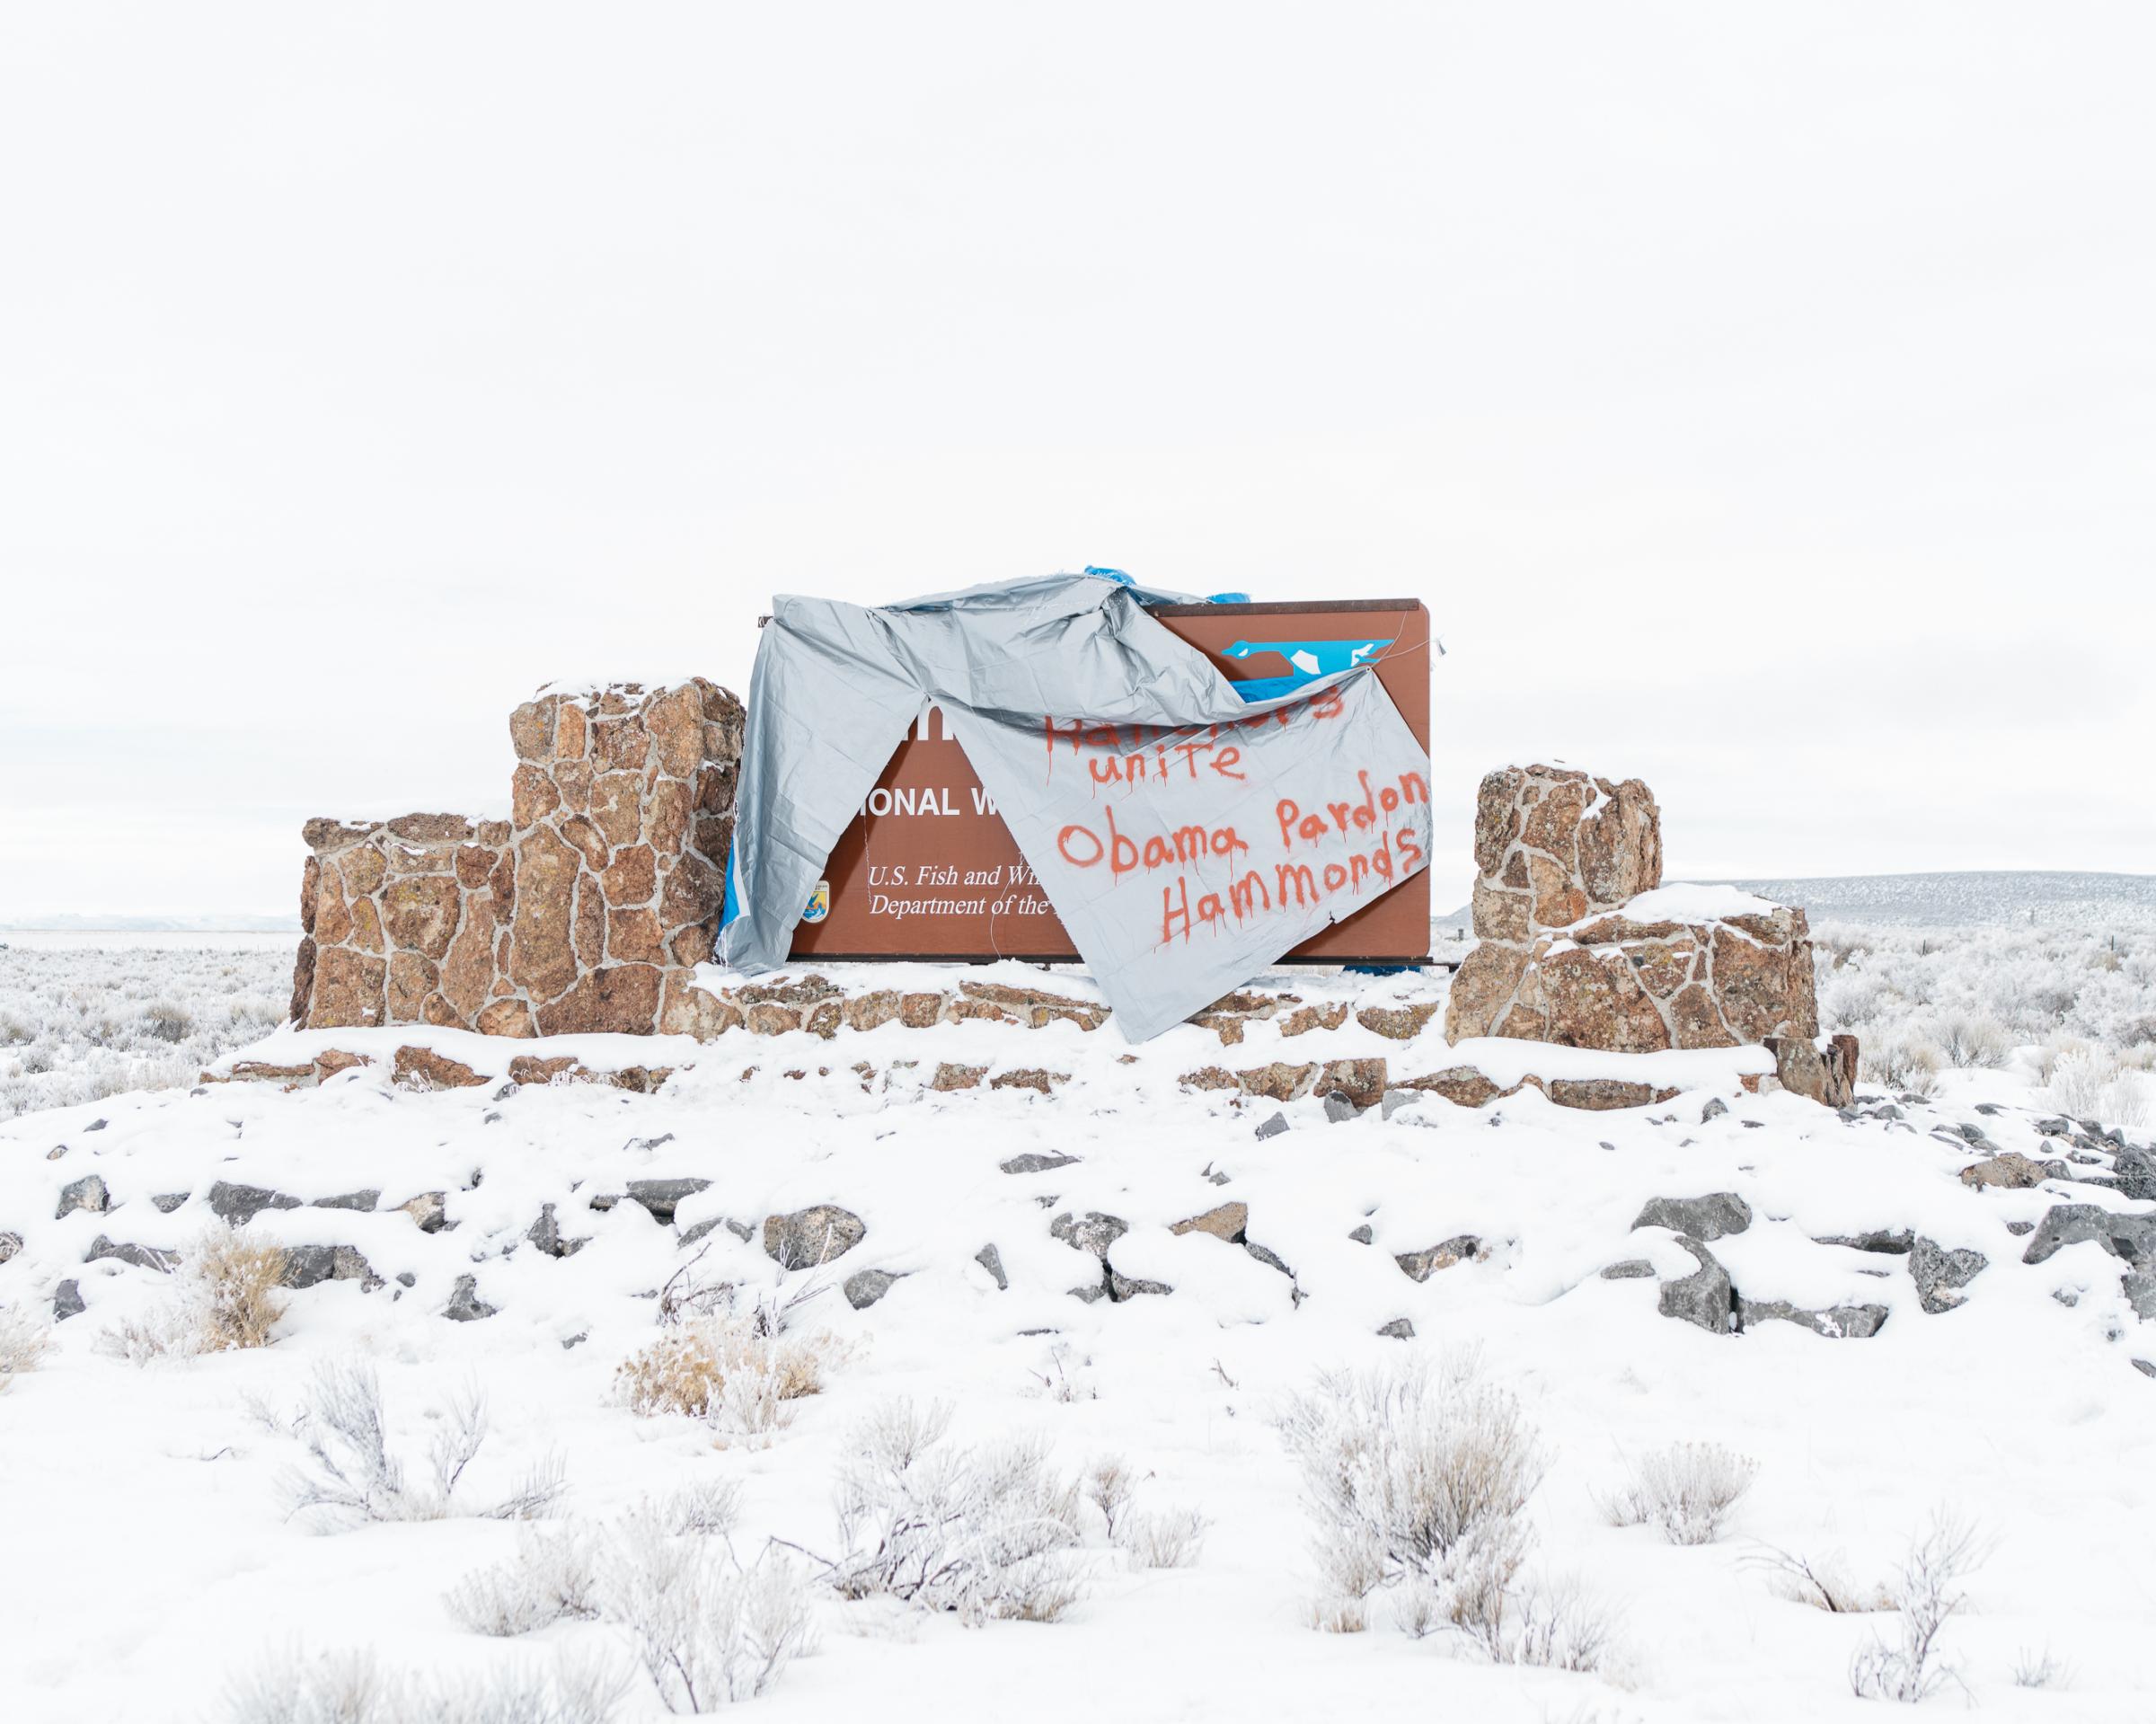 A sign for the Malheur National Wildlife Refuge along Frenchglenn Highway is draped with a tarp that reads "Ranchers Unite, Obama Pardon Hammonds" on Jan. 11, 2016.